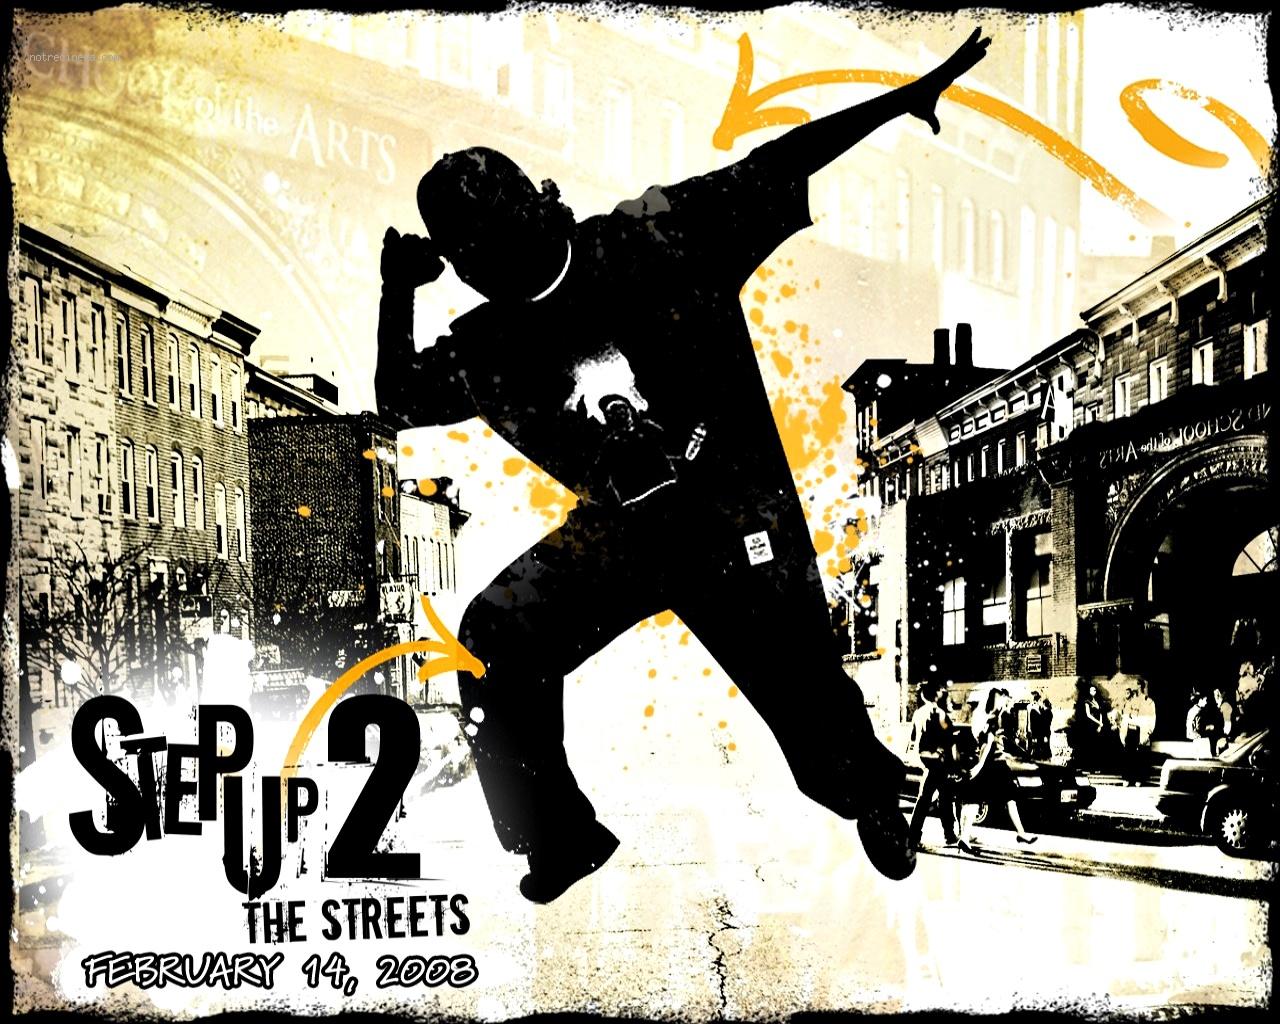 Step Up 2, the Streets